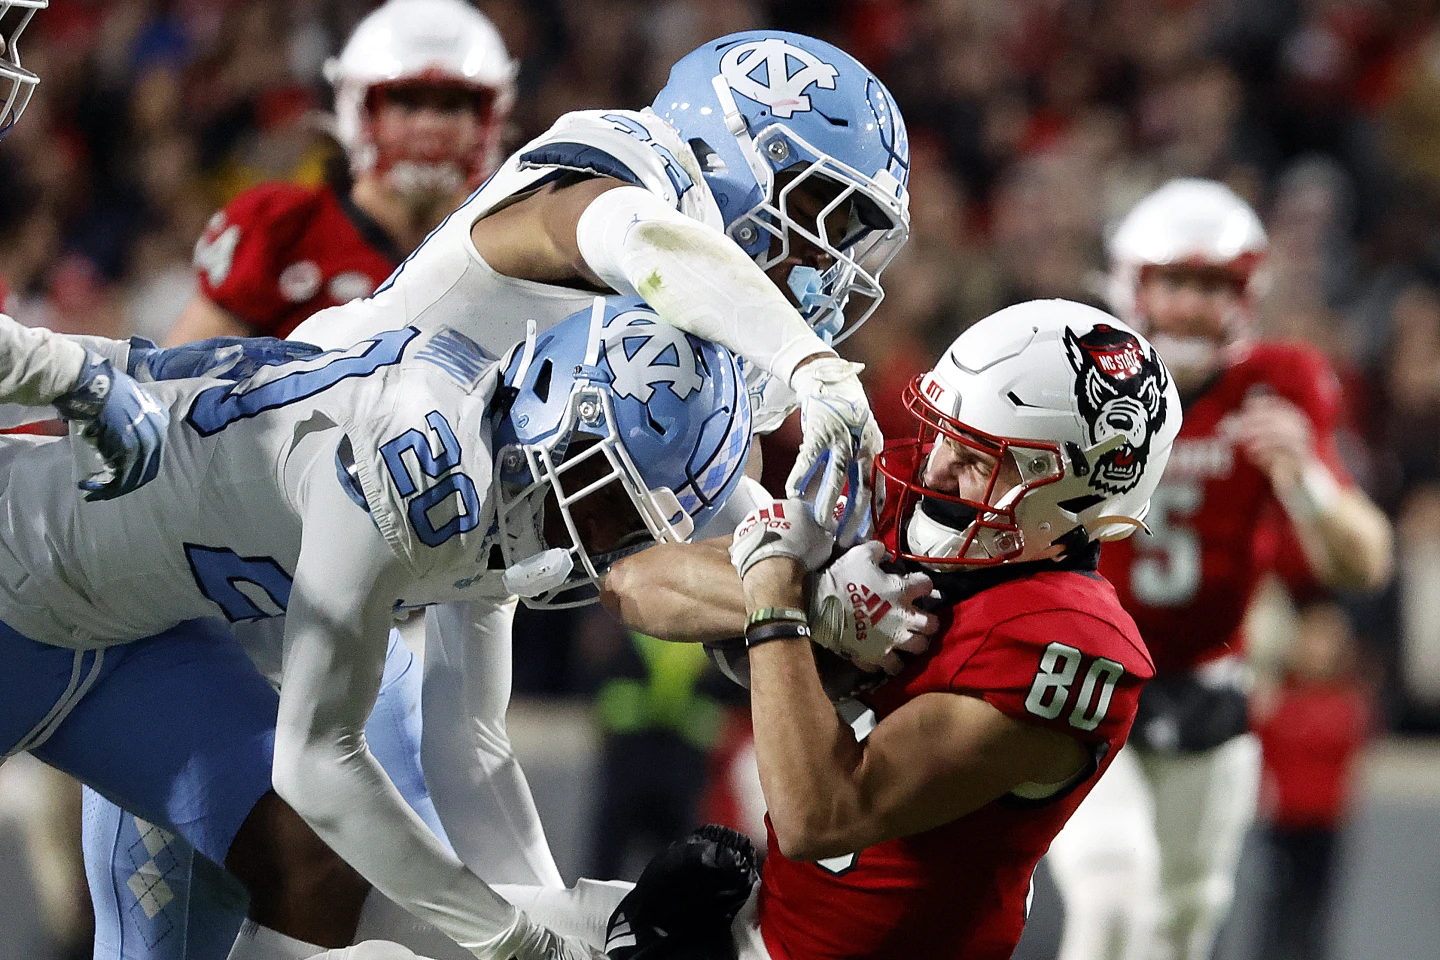 It’s a cold, cruel night as UNC tumbles hard to N.C. State